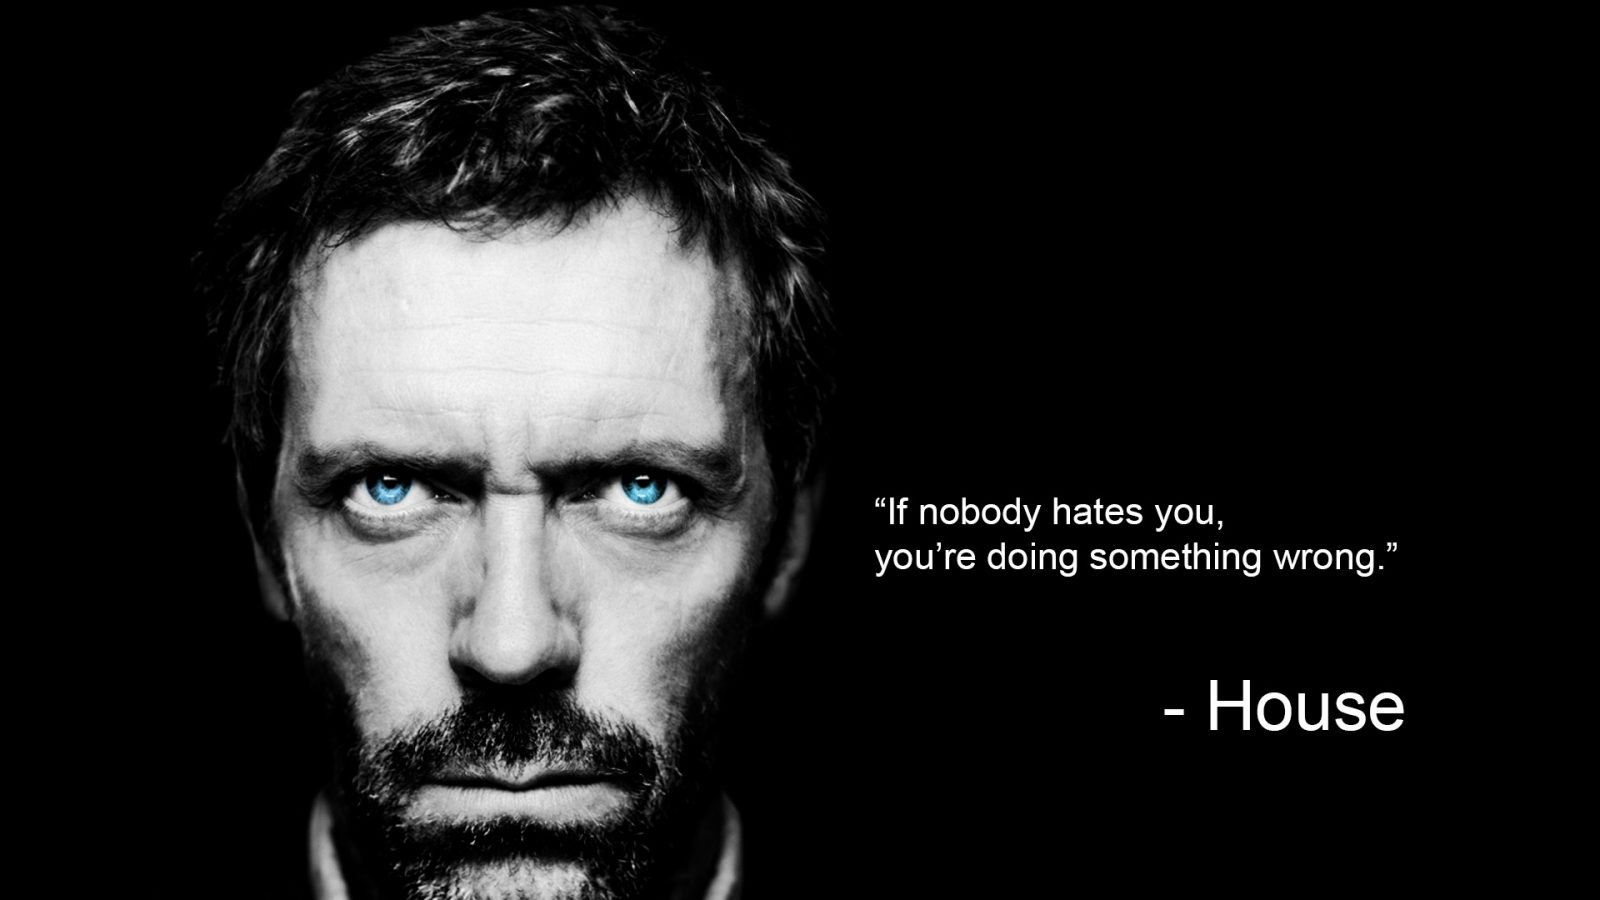 dr-house-quote-hd-wallpaper-3844818